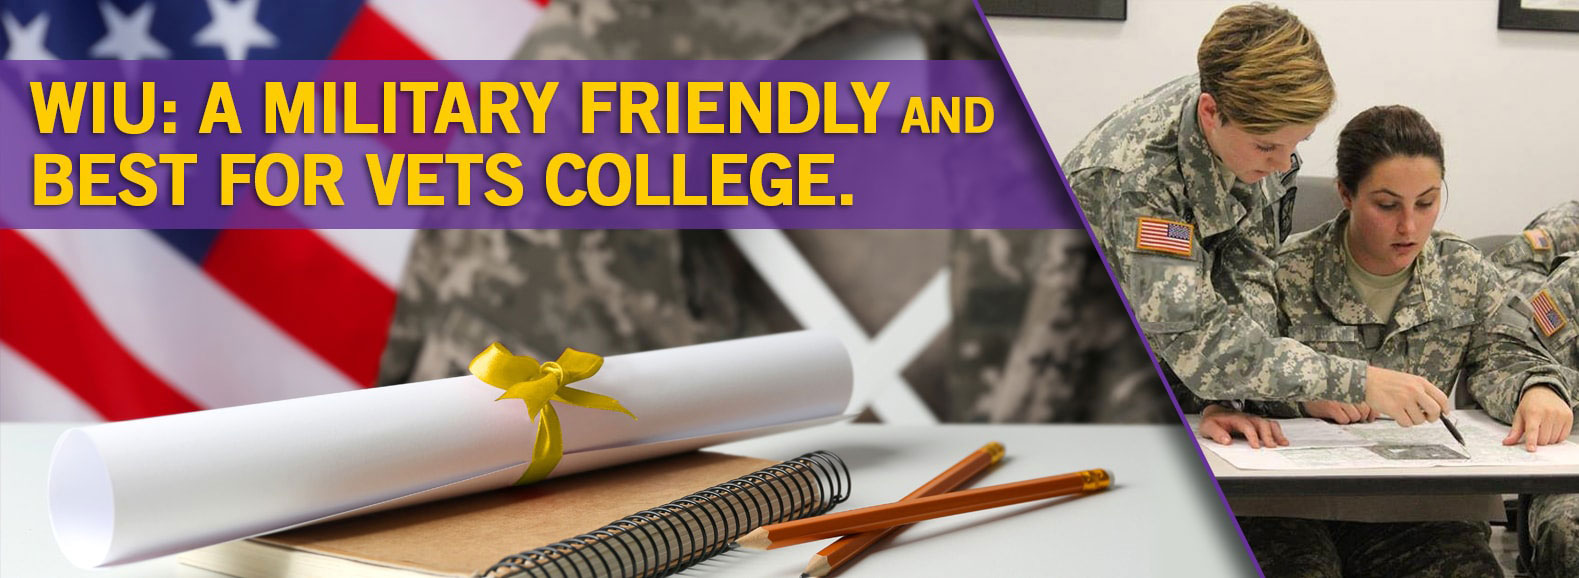 WIU: A Military Friendly and Best for Vets College.